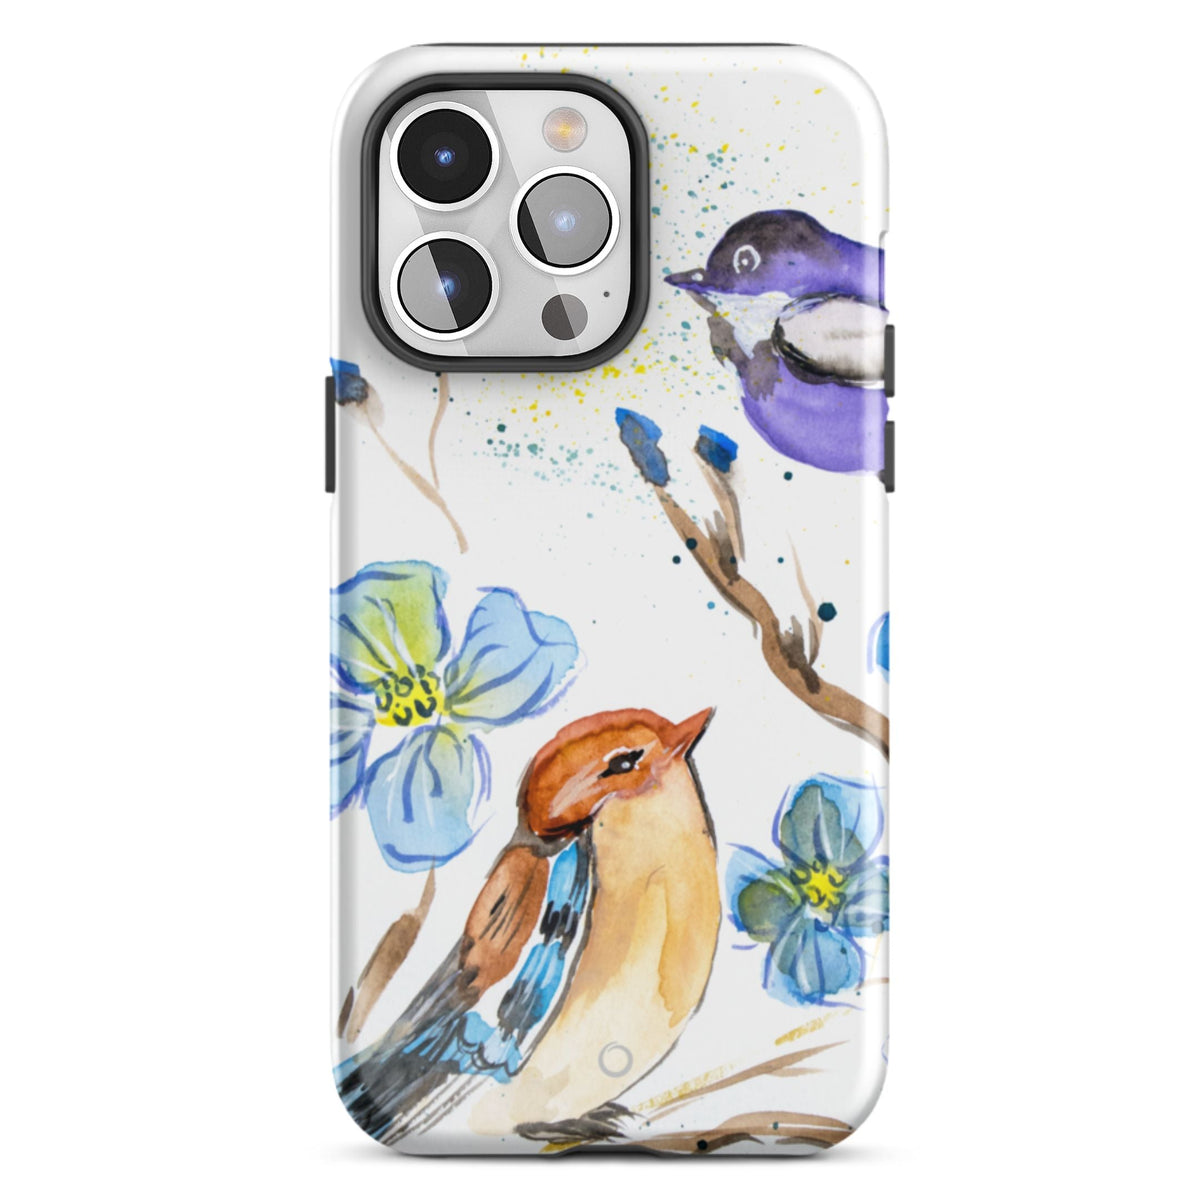 Winged Duets iPhone Case - iPhone 11 Pro Max